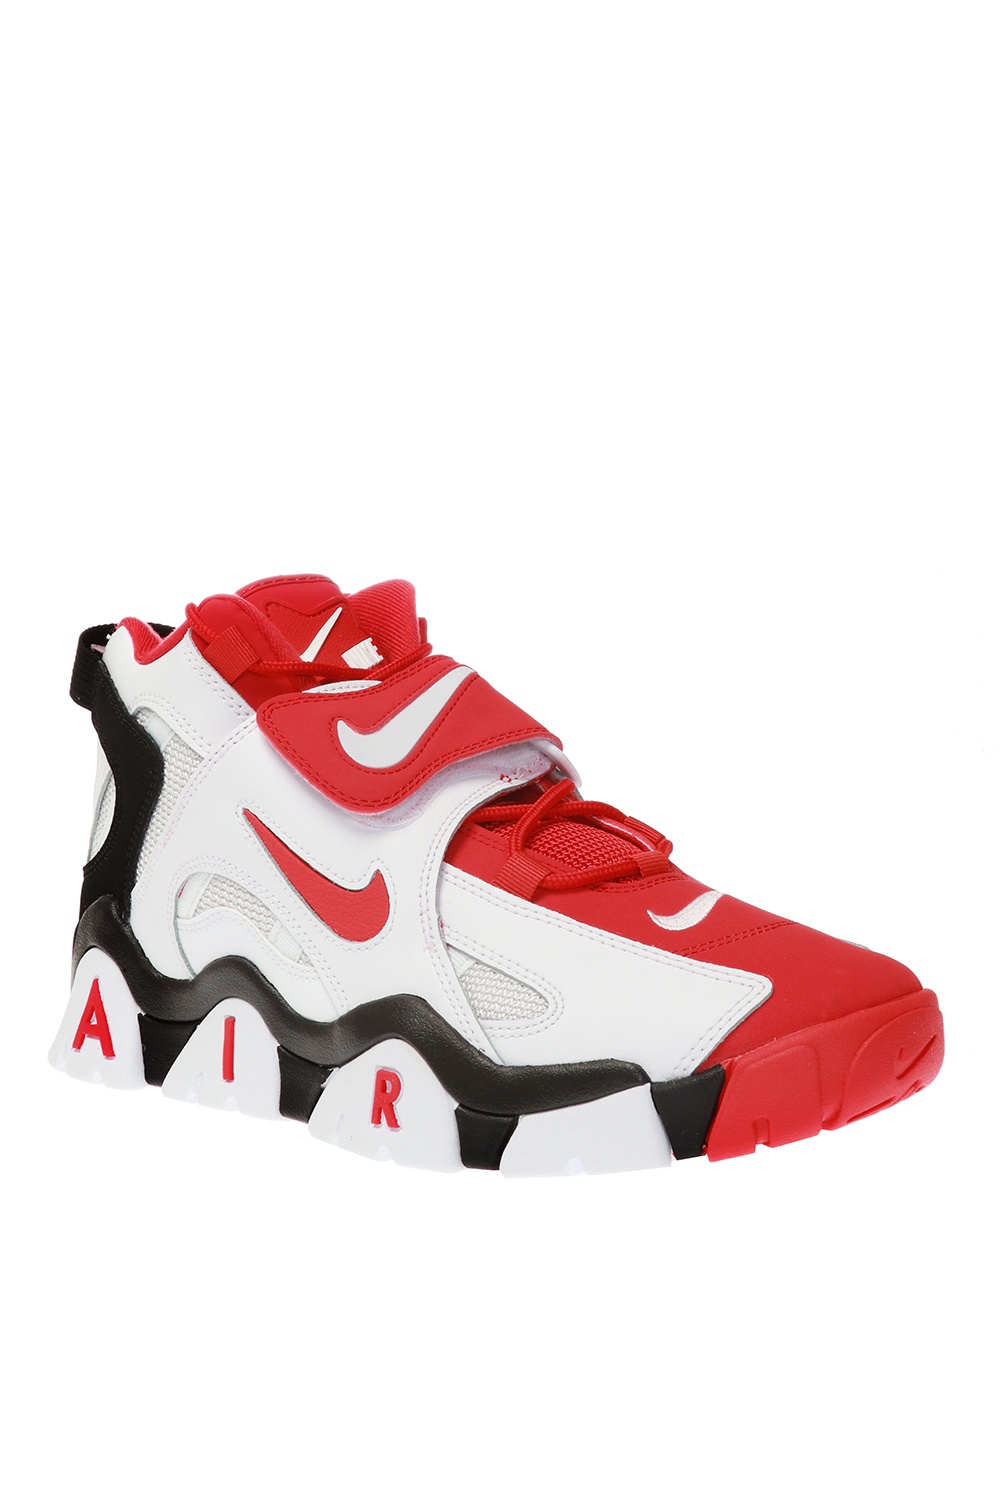 air barrage mid red